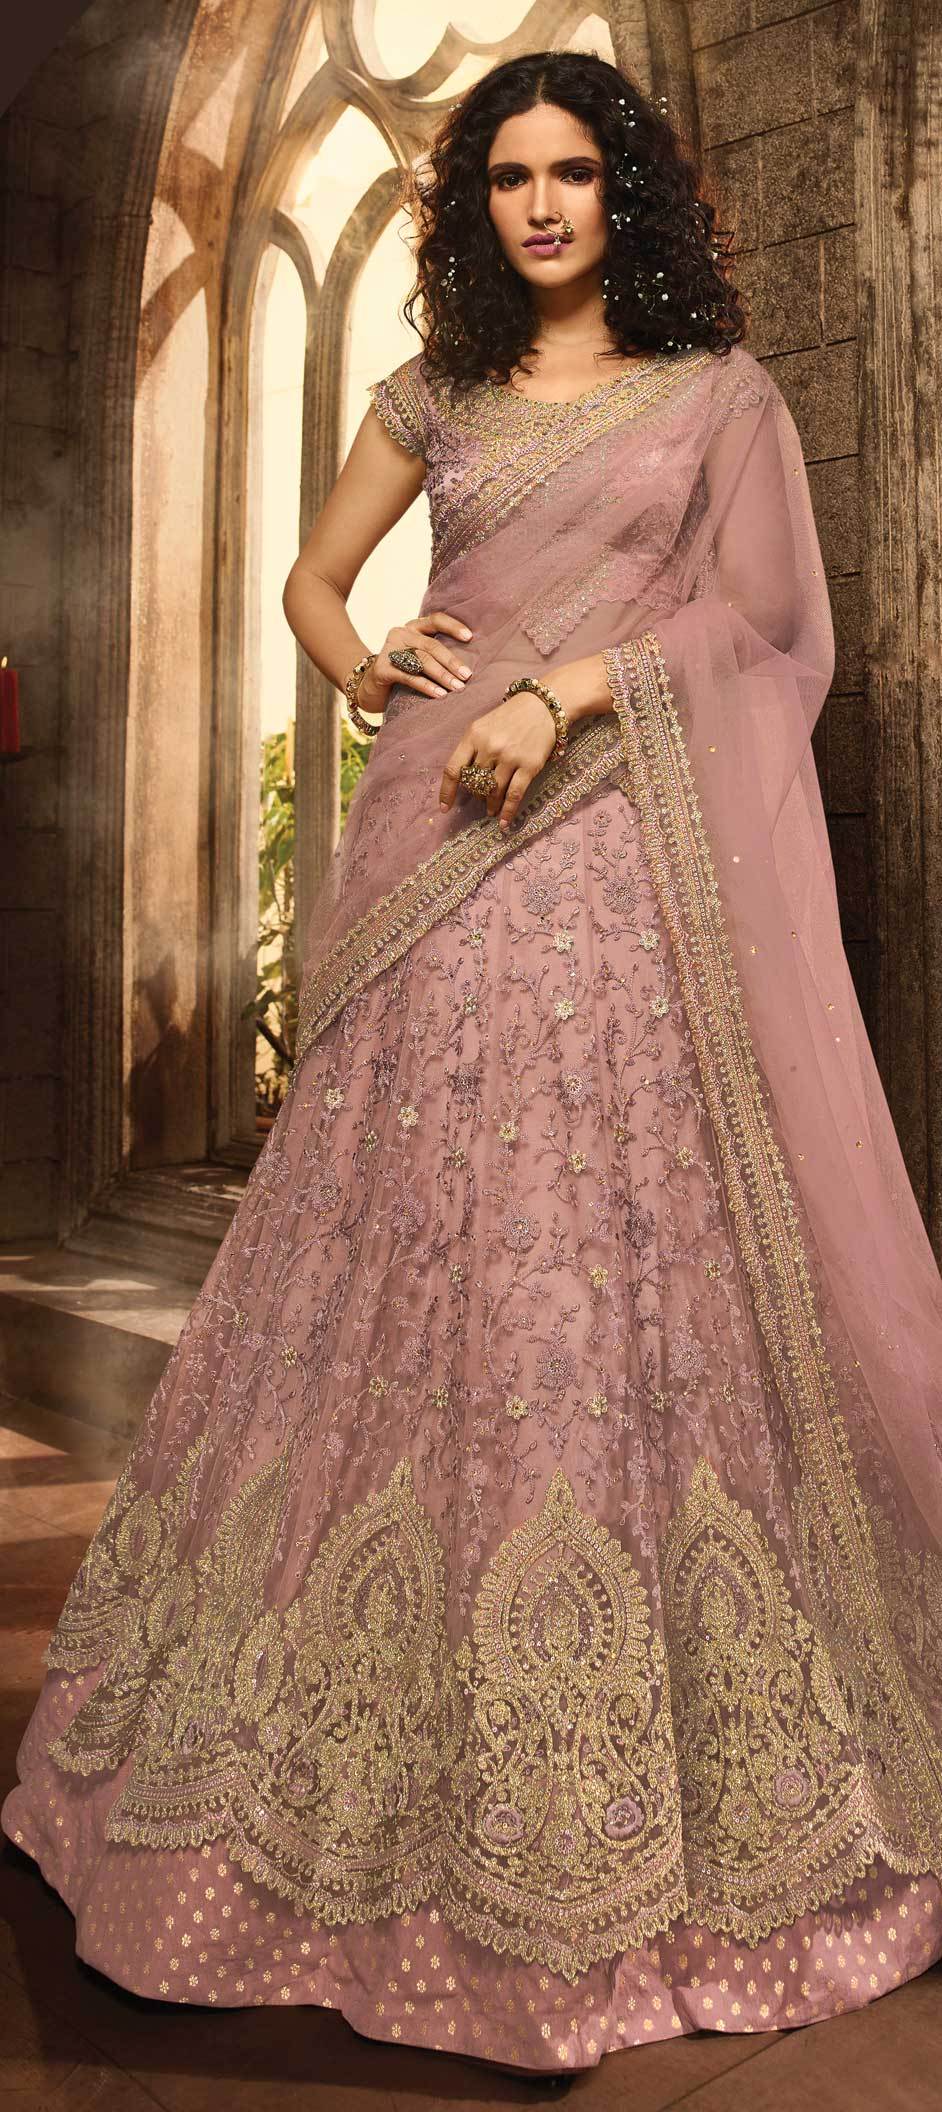 Net Bollywood Lehenga in Pink and Majenta with Embroidered work